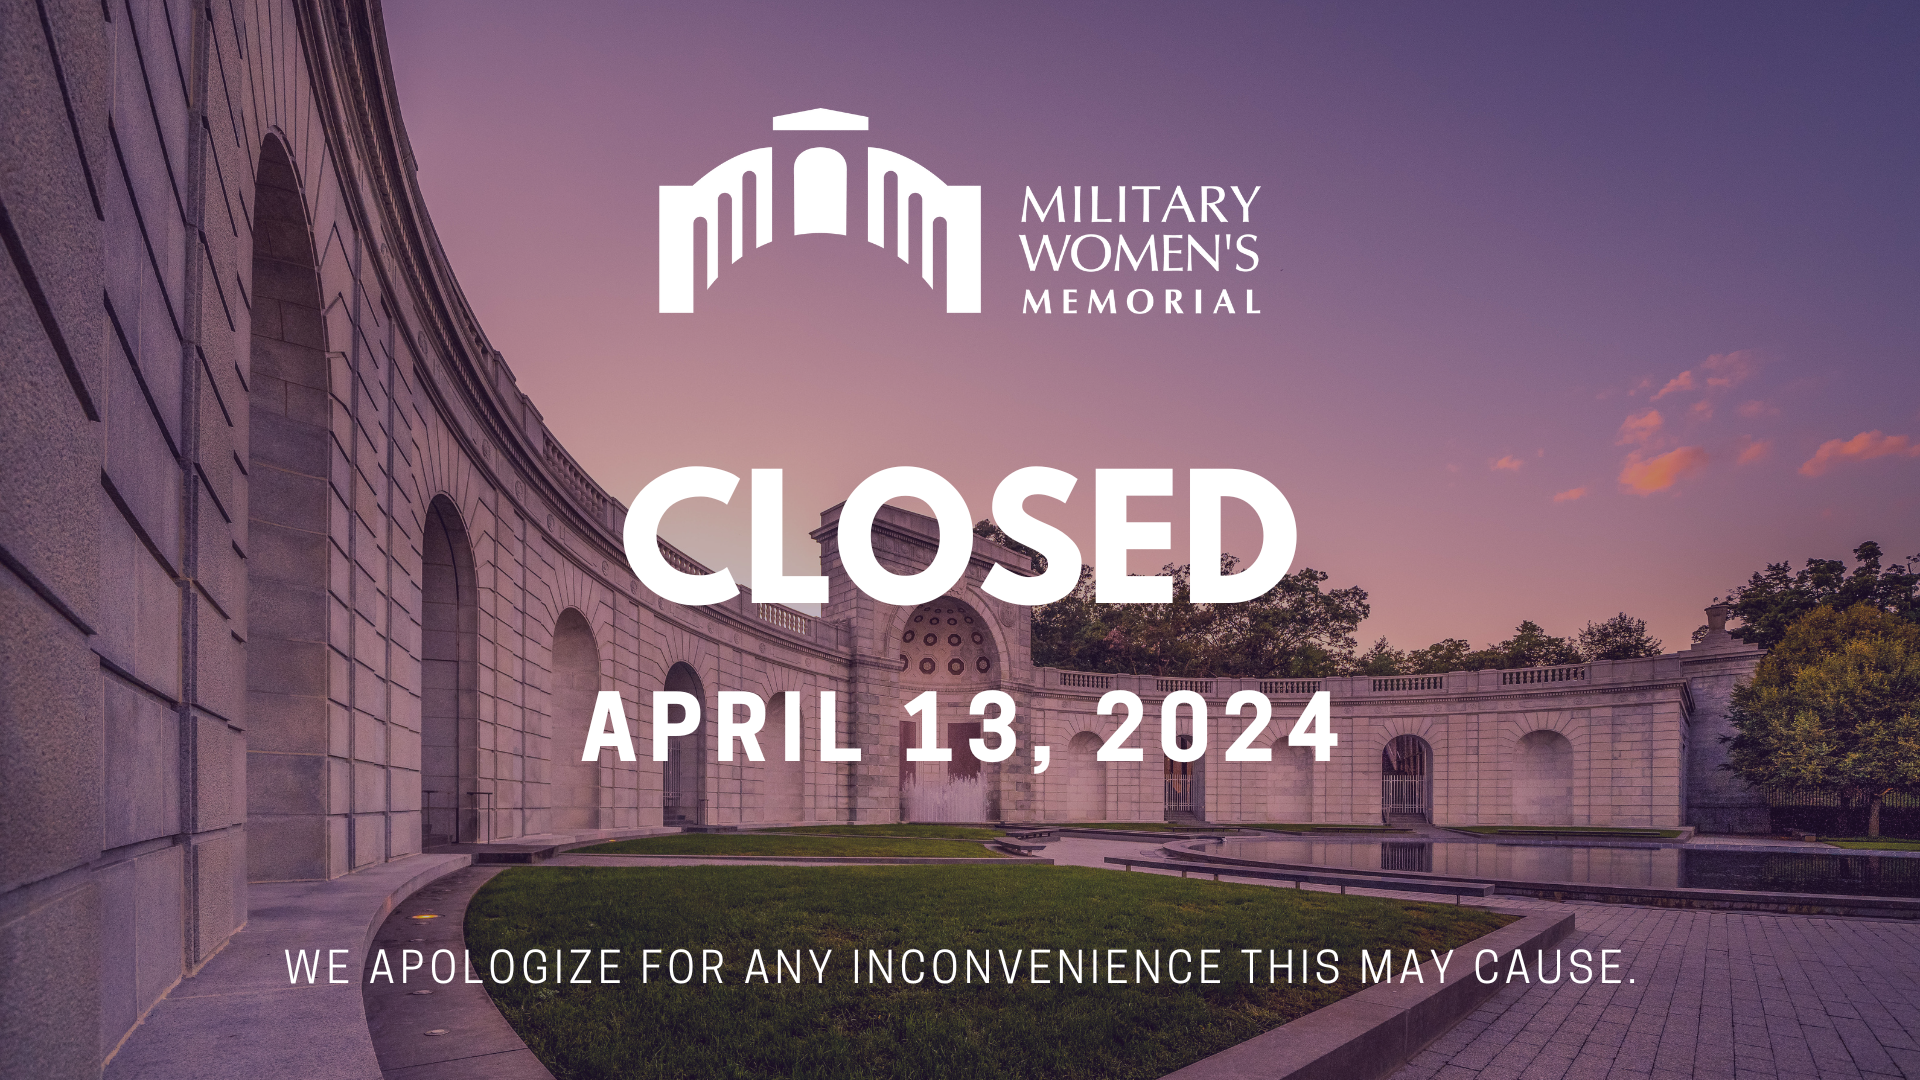 Memorial closed April 13, 2024. We apologize for any inconvenience.